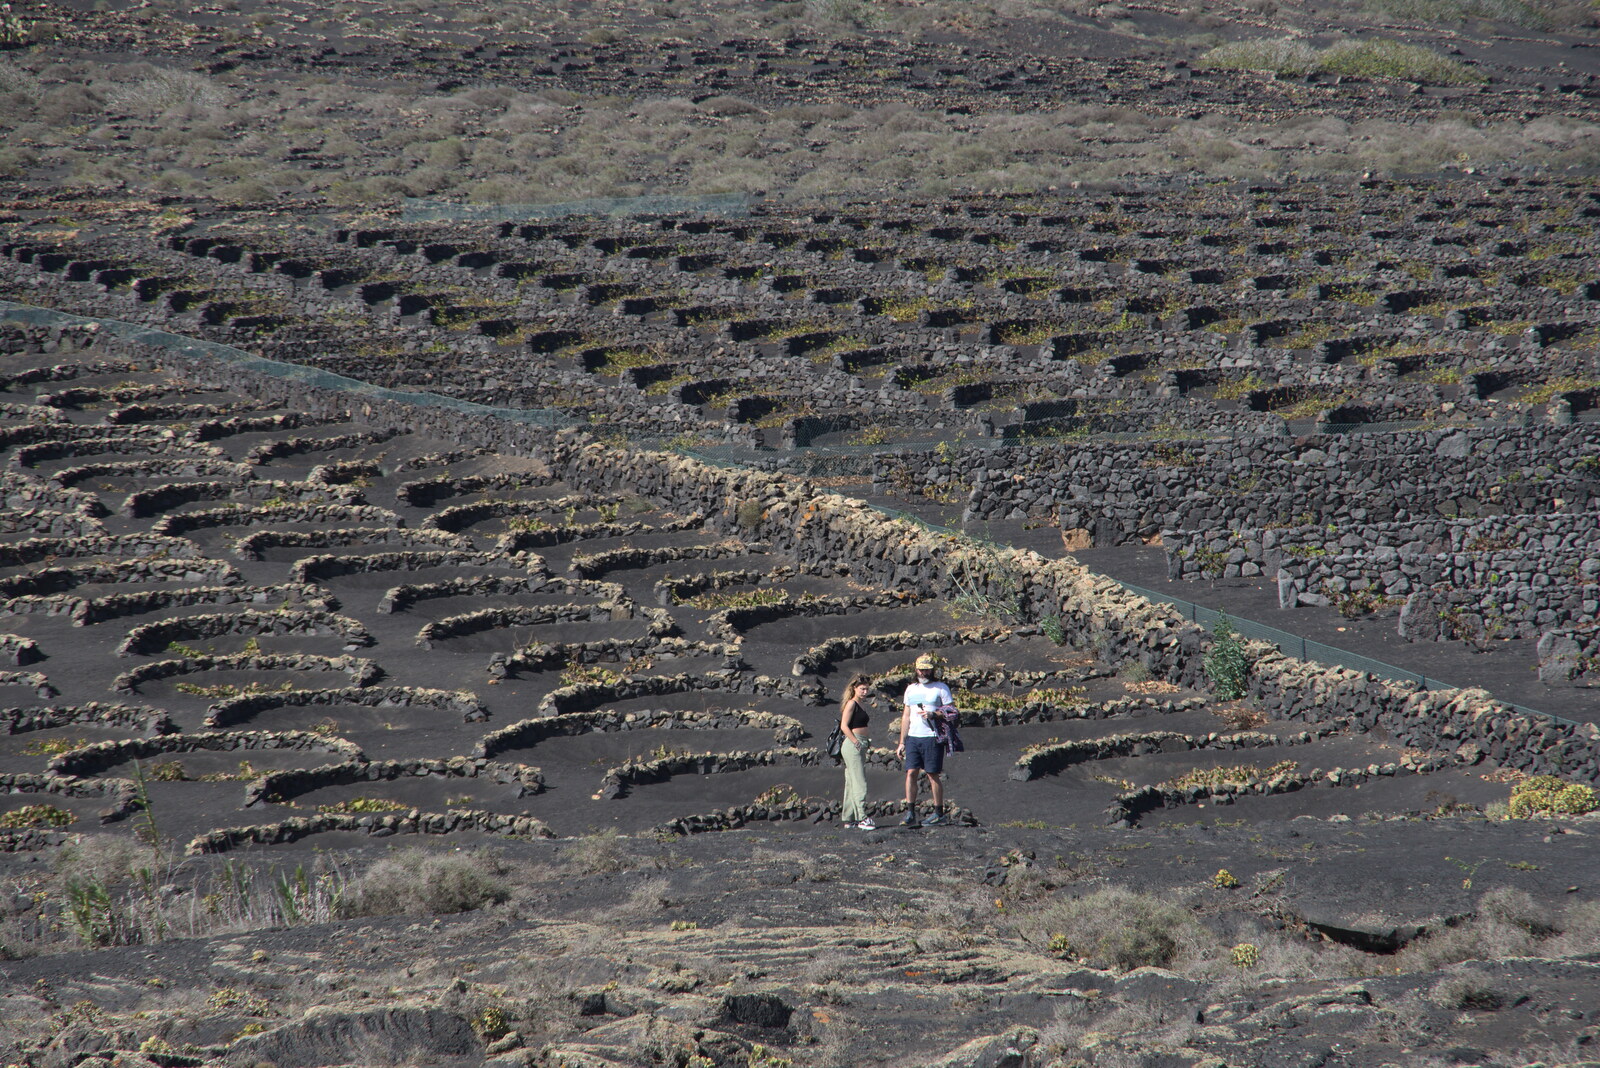 Semi-circle walls where vines are grown from The Volcanoes of Lanzarote, Canary Islands, Spain - 27th October 2021